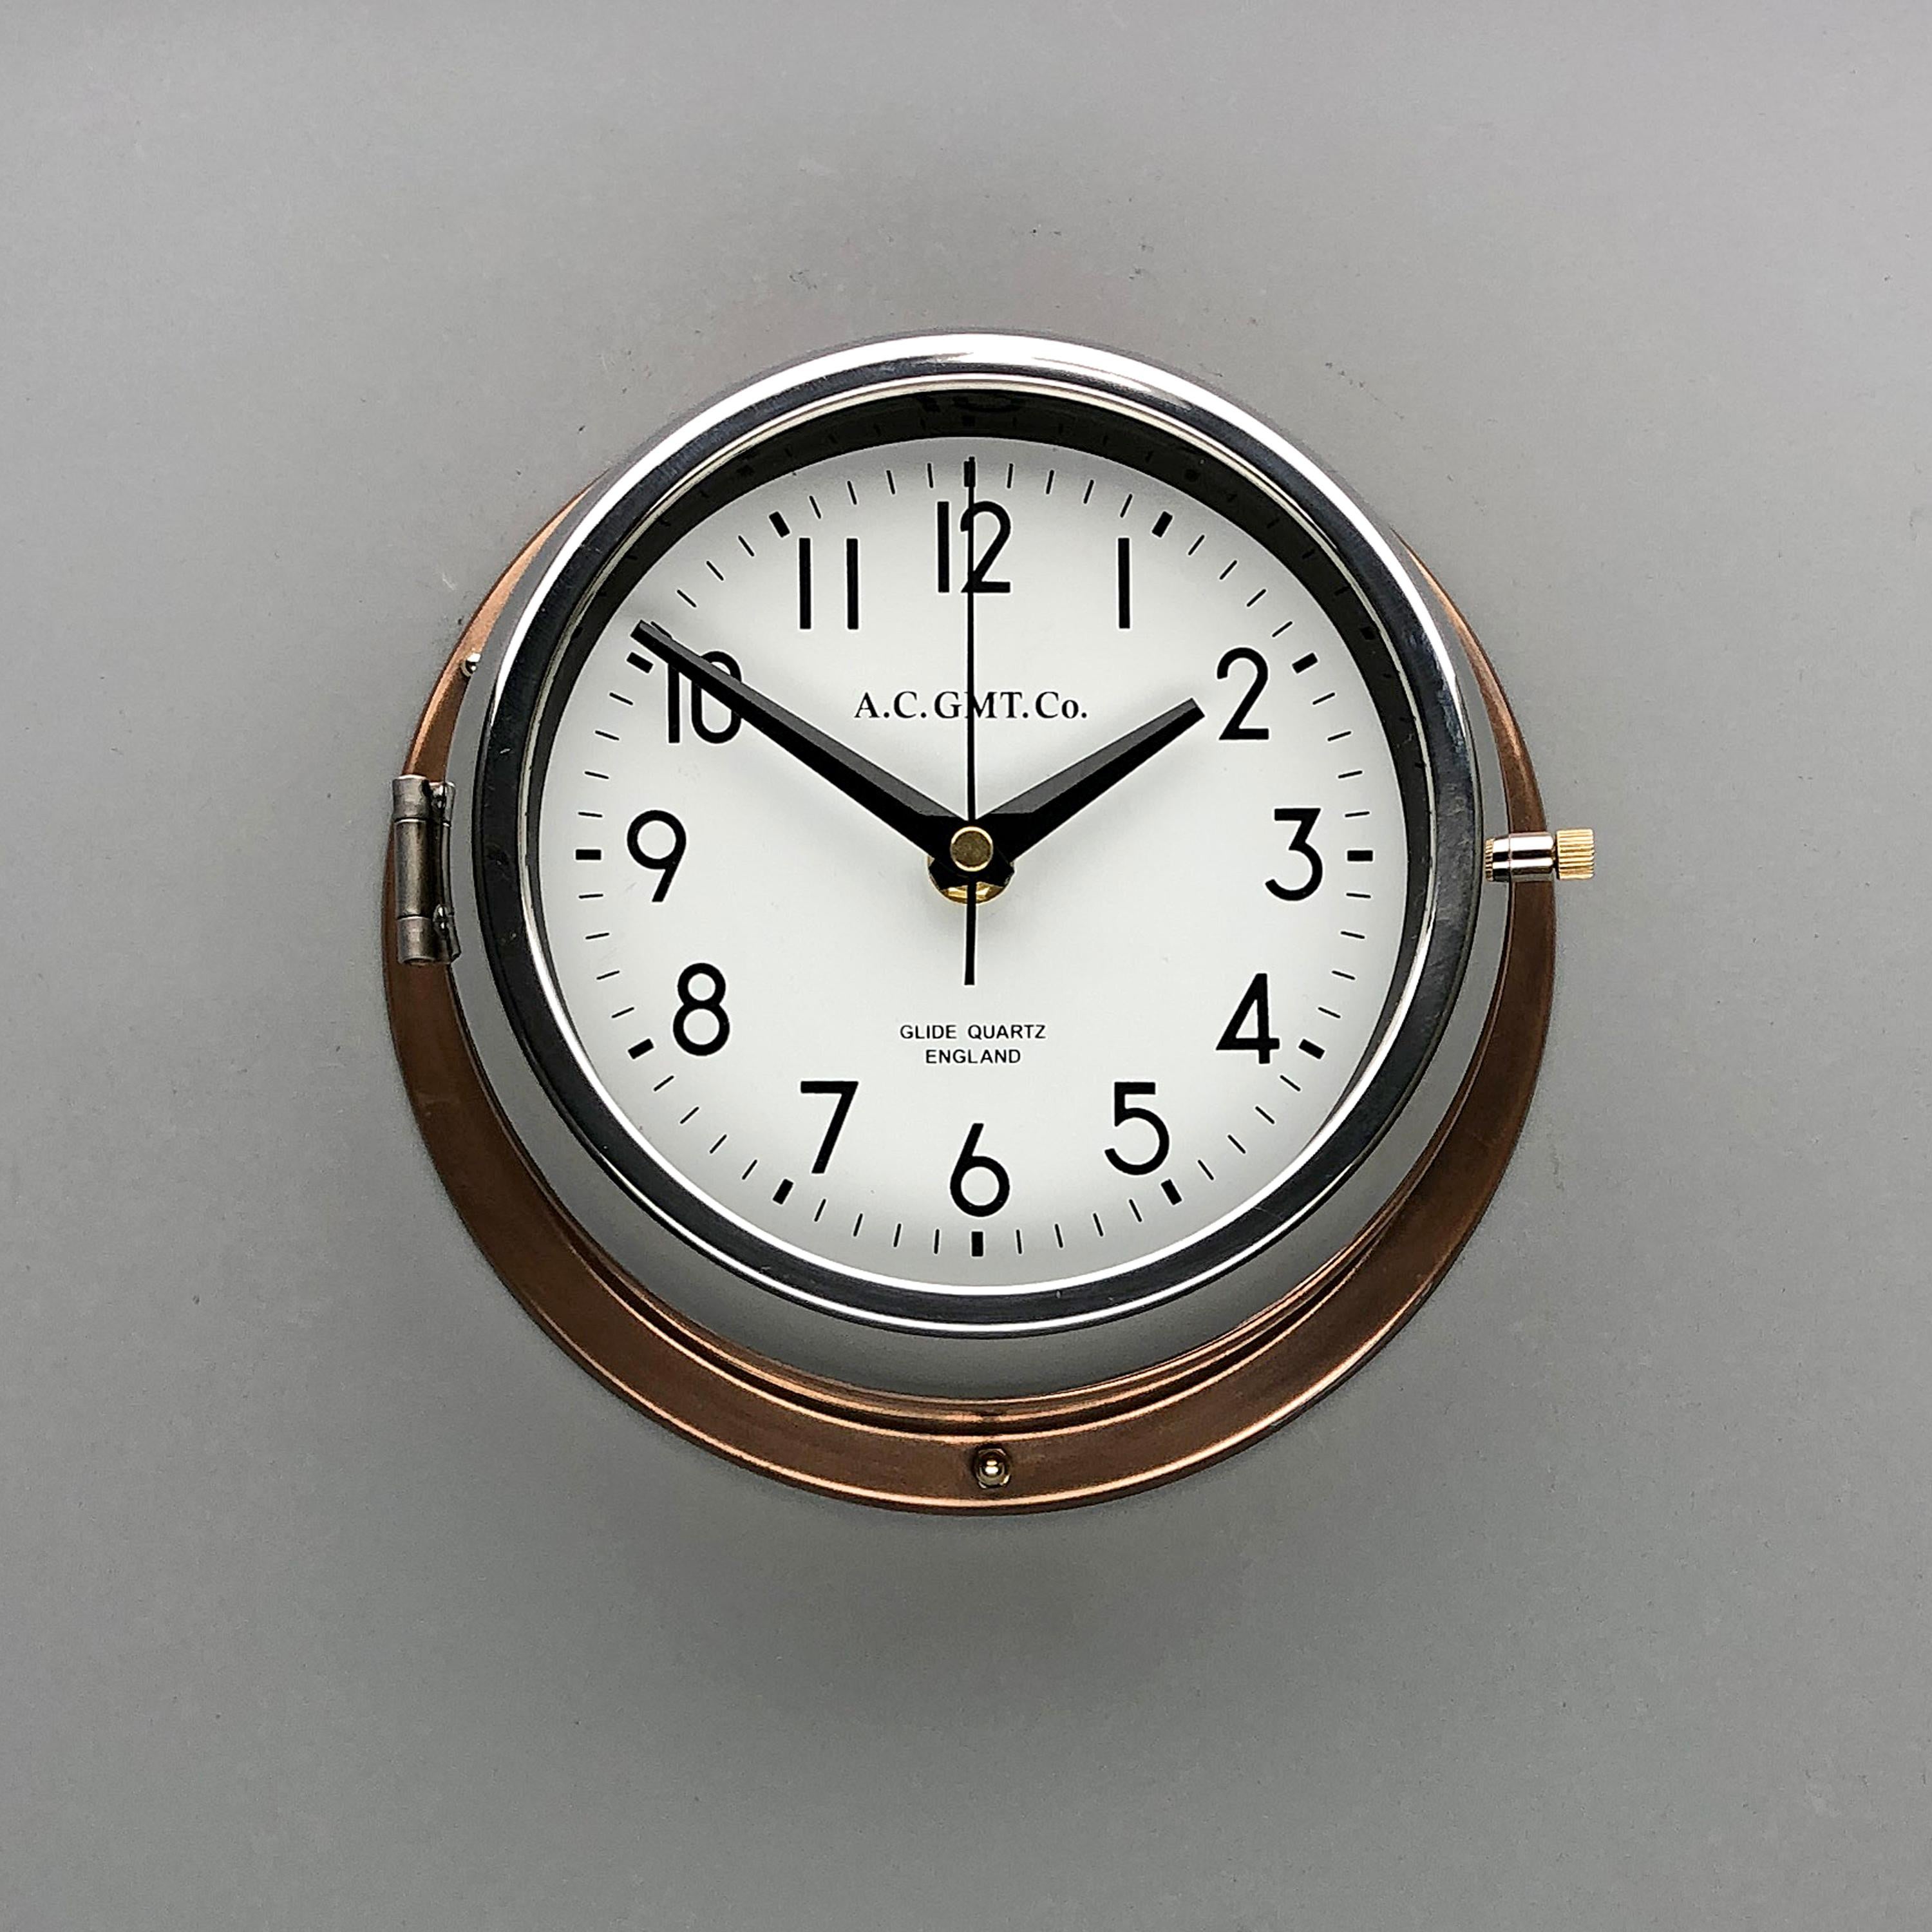 1970s British Bronze and Chrome AC GMT Co. Industrial Wall Clock White Dial 11